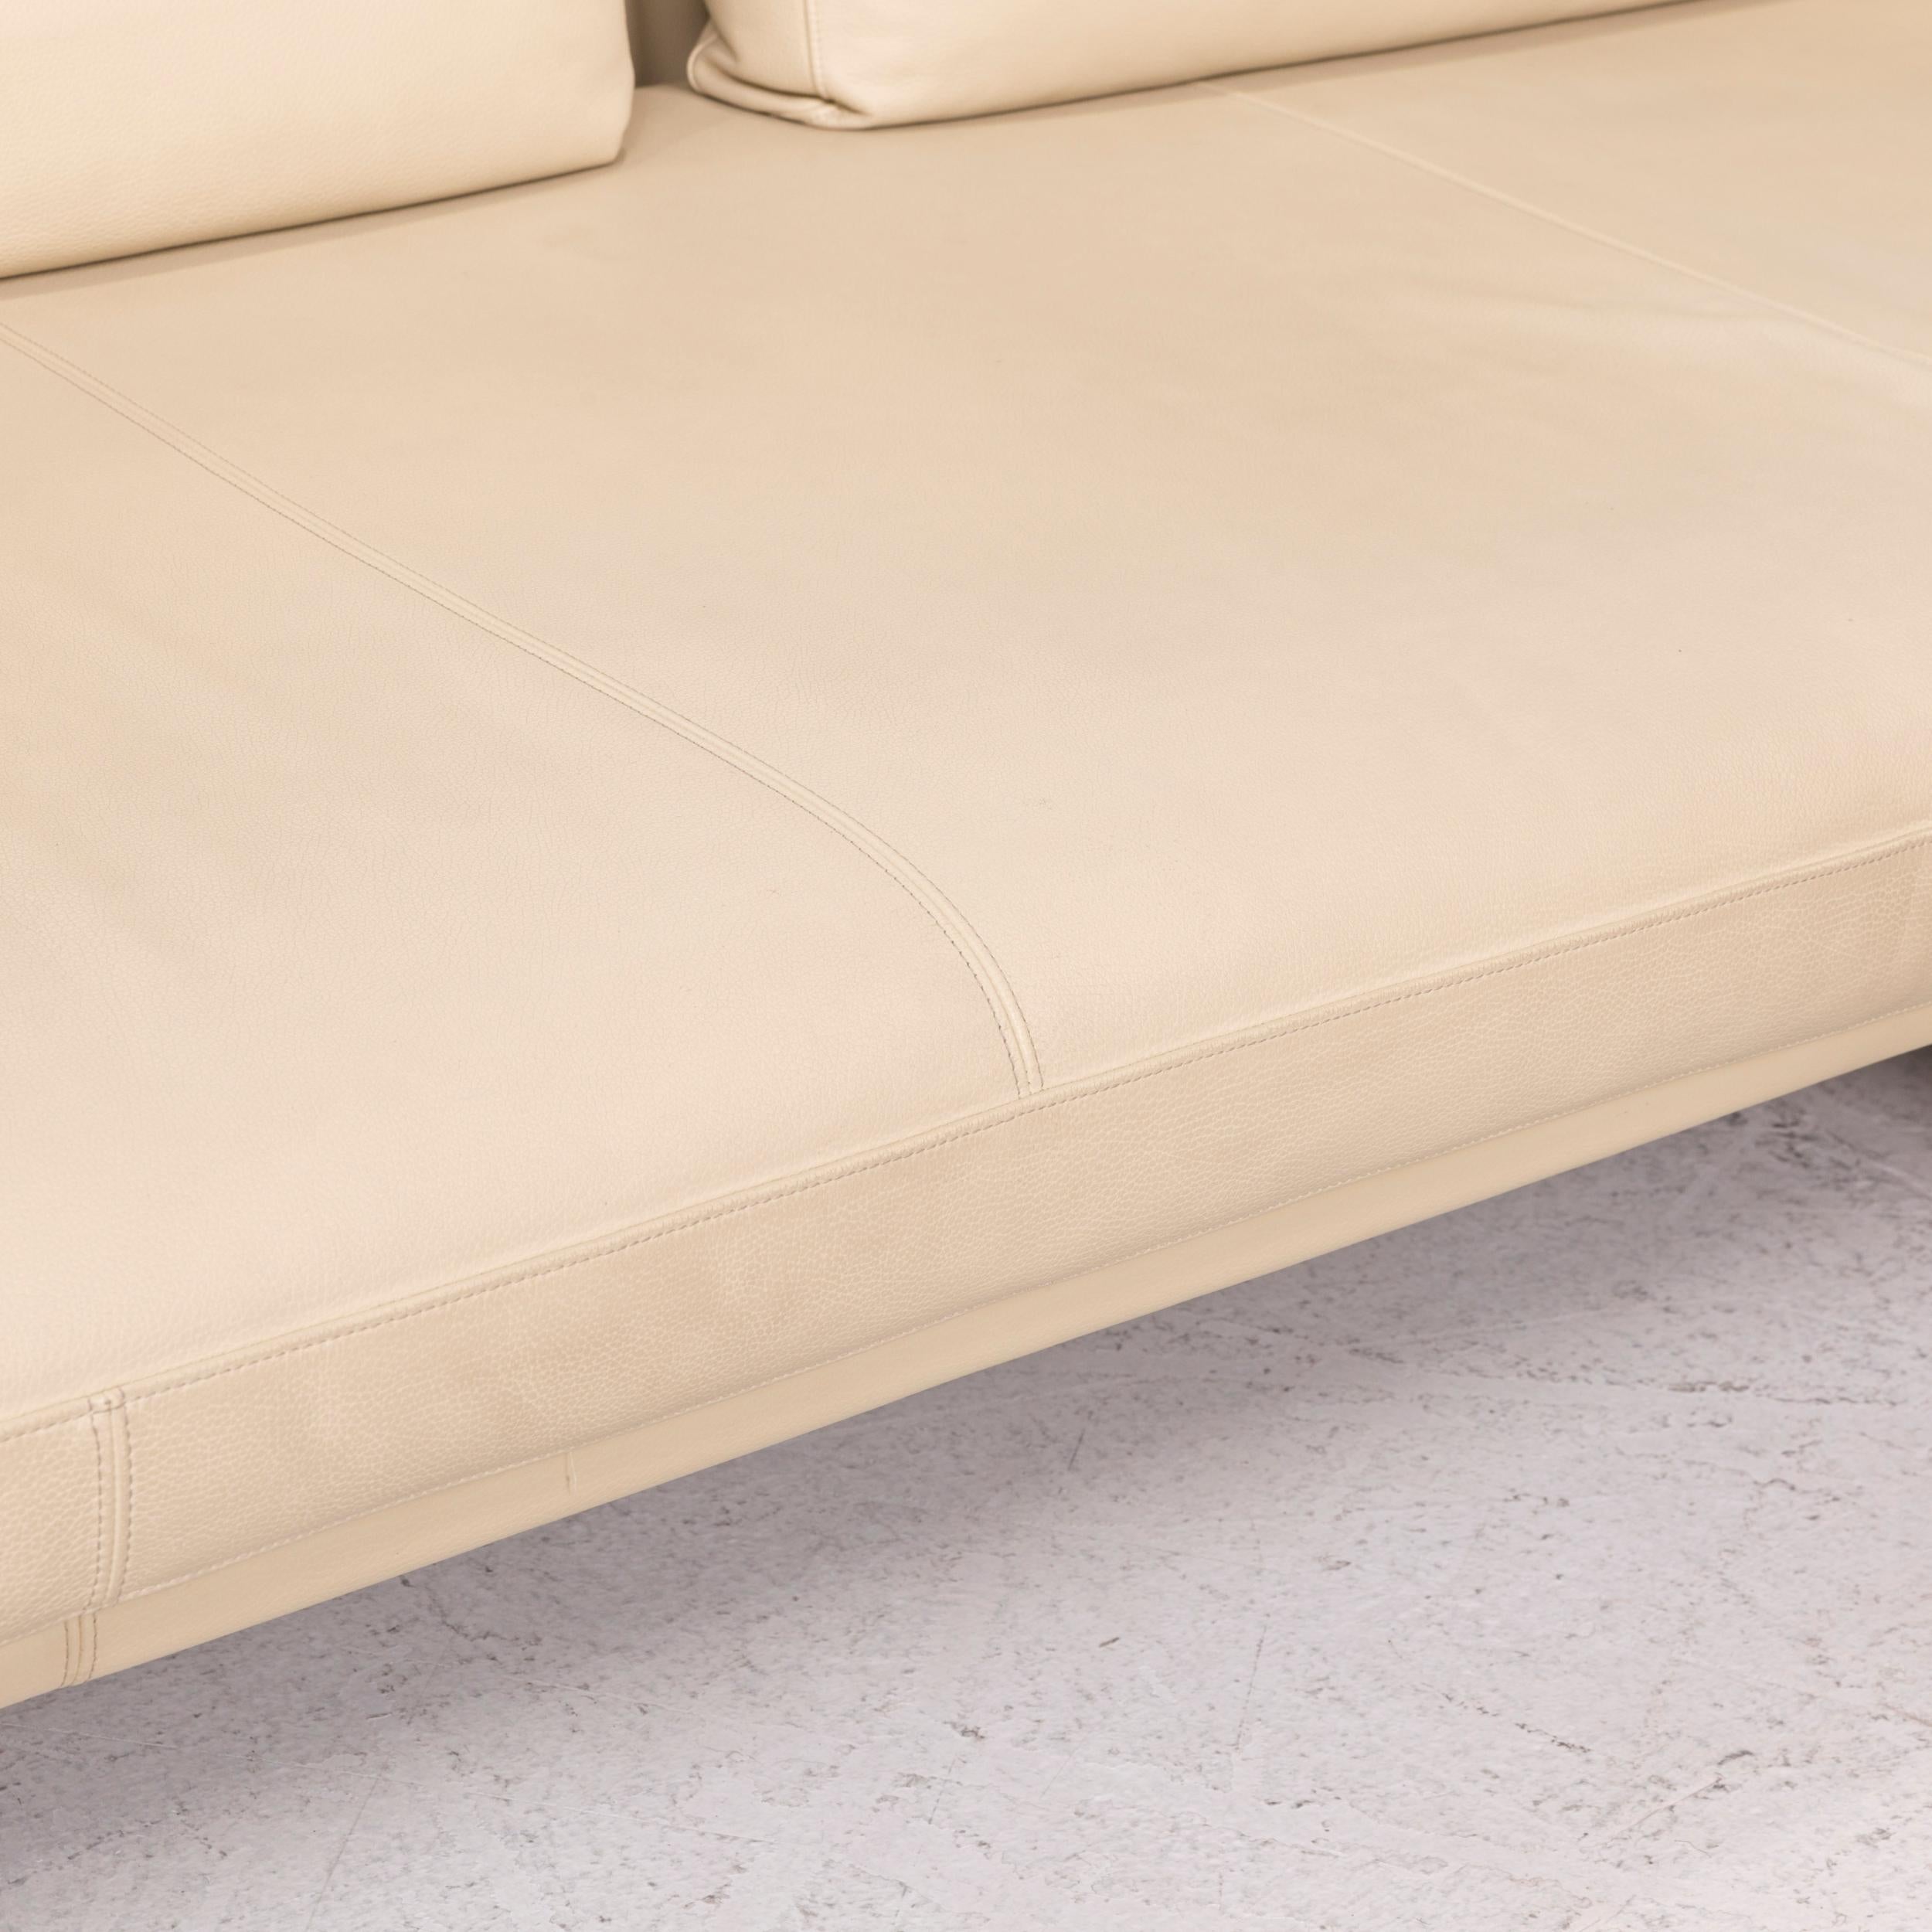 We bring to you a Walter Knoll together leather sofa cream corner sofa.
   
 

 Product measurements in centimeters:
 

Depth 97
Width 283
Height 83
Seat-height 37
Seat-depth 65
Seat-width 253
Back-height 43.
   